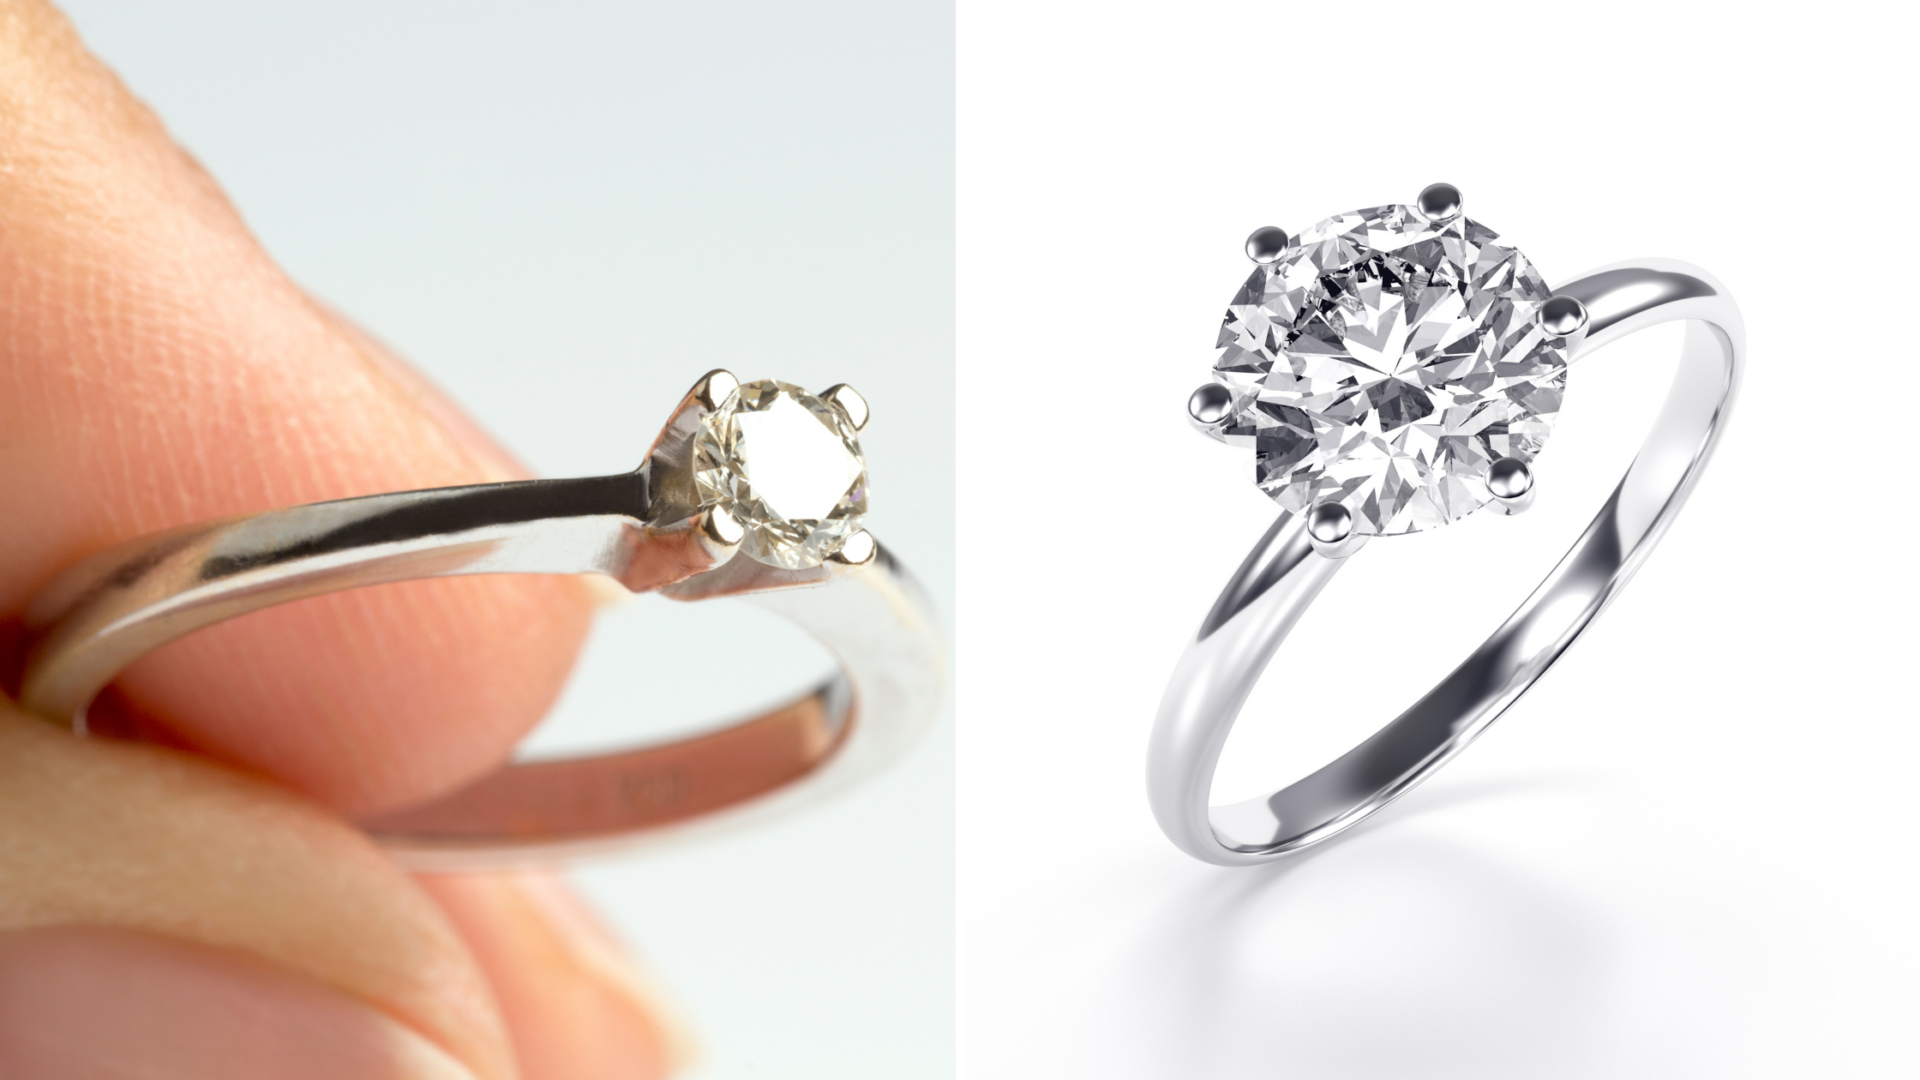 Upgrading or Trading In Your Engagement Ring